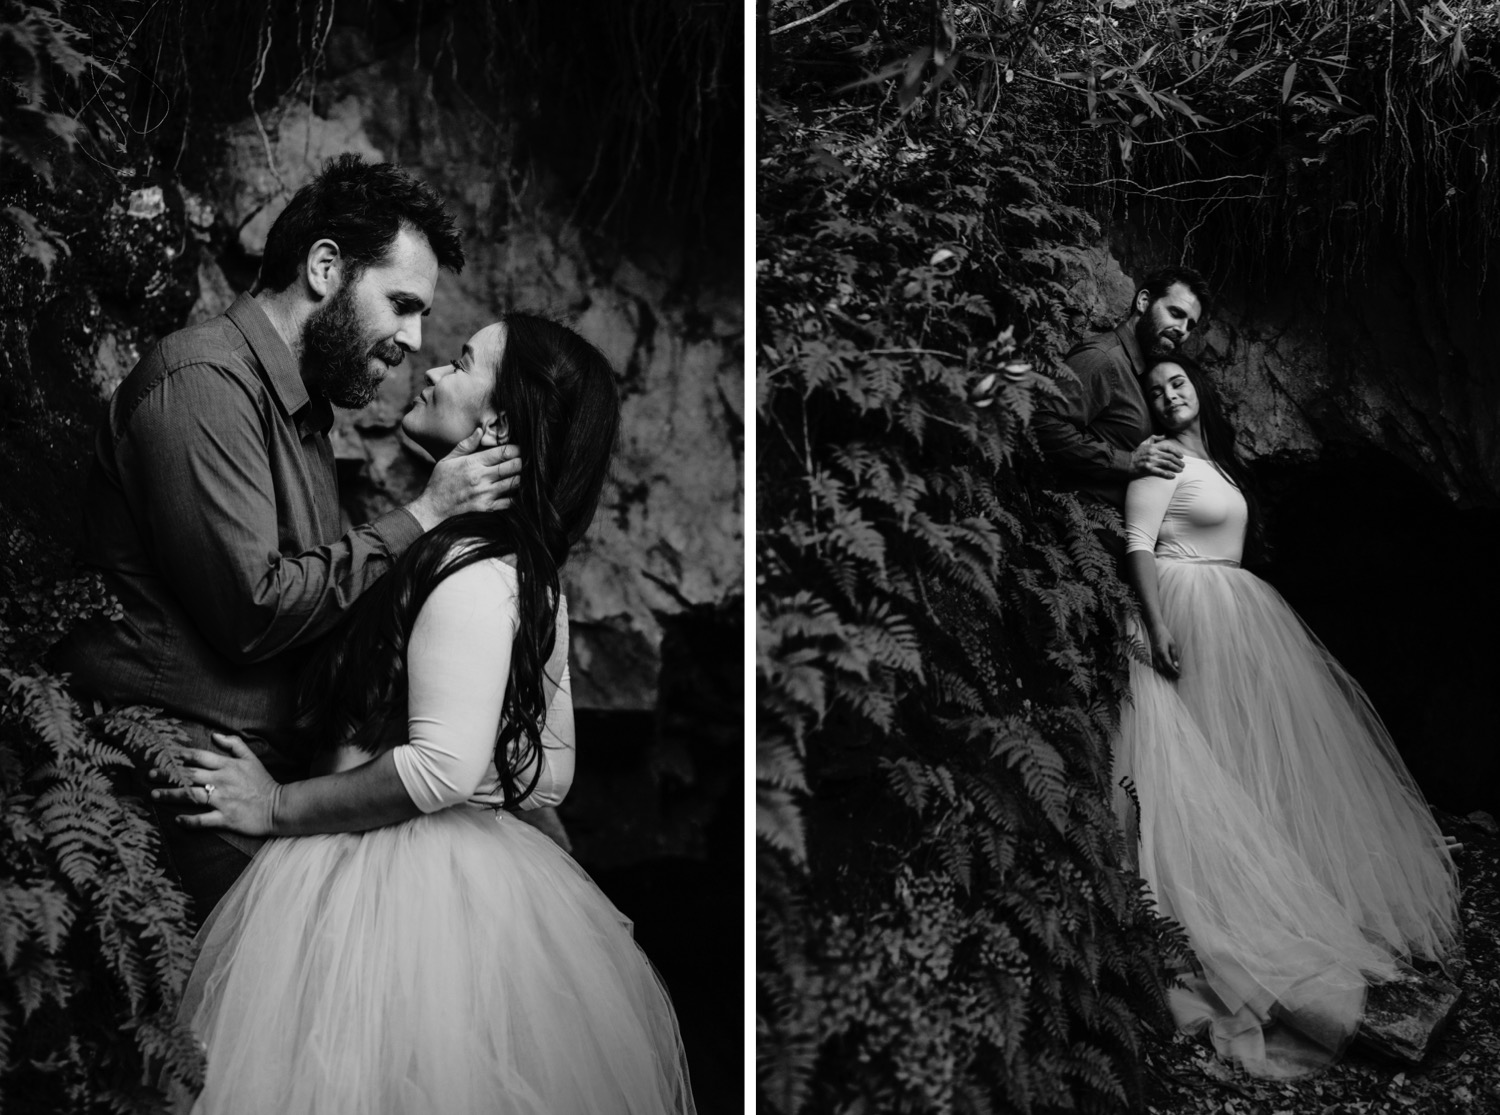 Couple stands in an embrace against foliage during their forest engagement photoshoot.